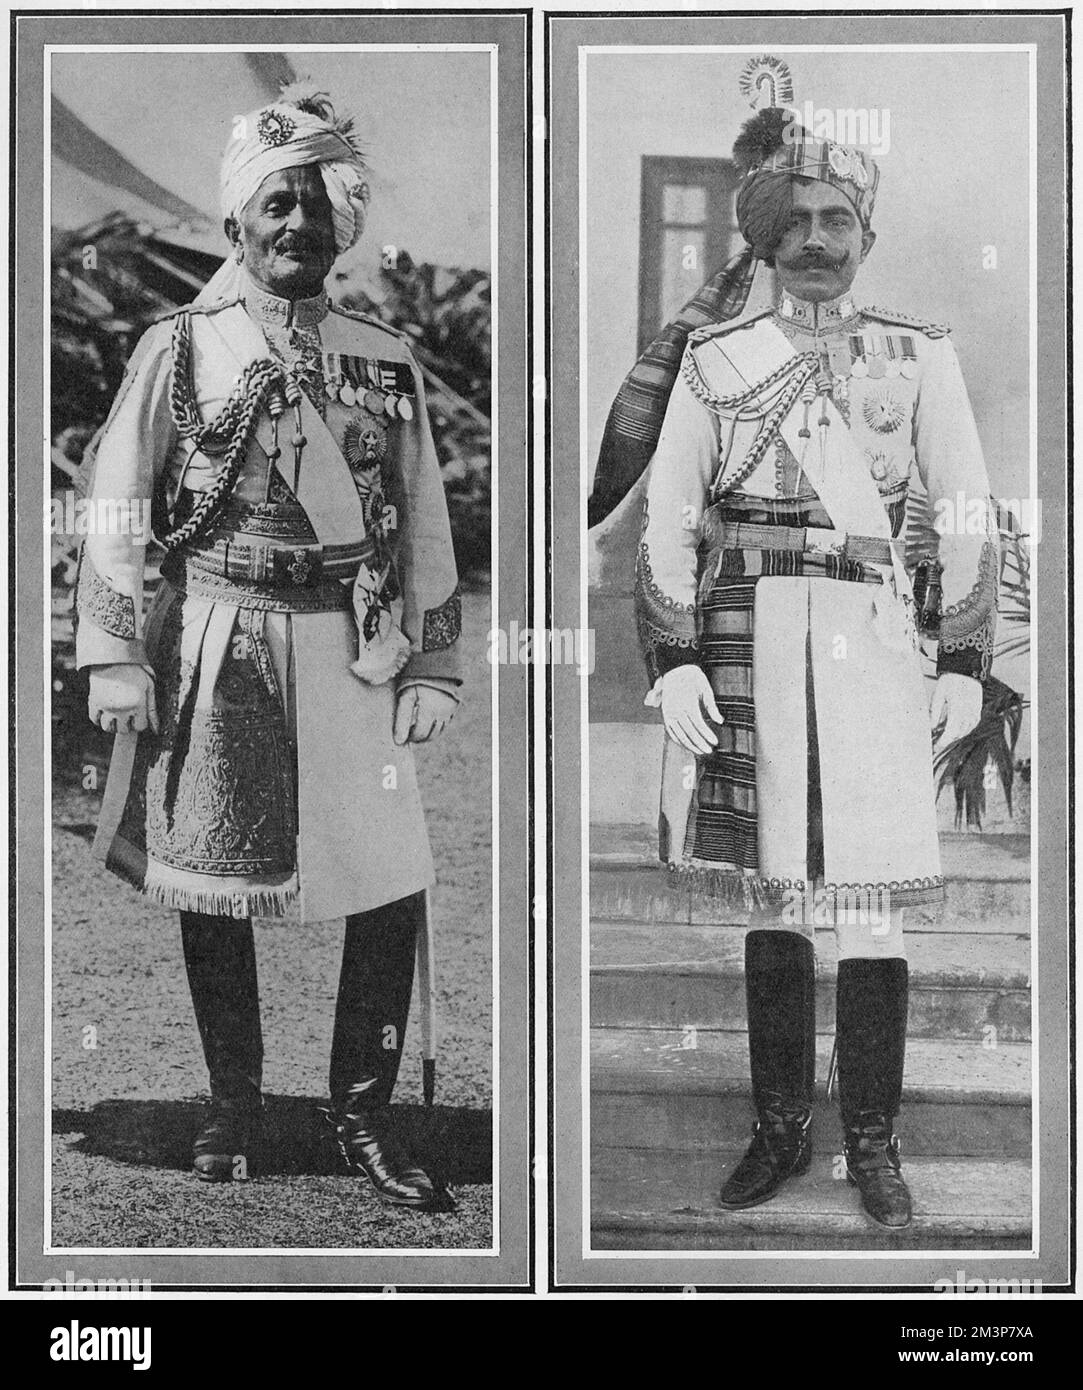 On the left, Lieutenant-General MAHARAJA SRI SIR PRATAP SINGH SAHIB BAHADUR OF IDAR (1845 - 1922). A career British Indian Army soldier, Maharaja of the princely state of Idar and heir to Ahmednagar from 1902 to 1911, when he abdicated in favor of his adopted son. A 'warrior' of the British Empire, was a friend to Queen Victoria, serving as aide-de-camp to Edward VII and was a close friend of the future King George V.  On the right, Colonel, Sir Ganga Singh, The MAHARAJAH OF BIKANER (1880-1943), who raised and equipped a camel corps.  He was colonel in the 2nd Bengal Lancers, fought for the Br Stock Photo